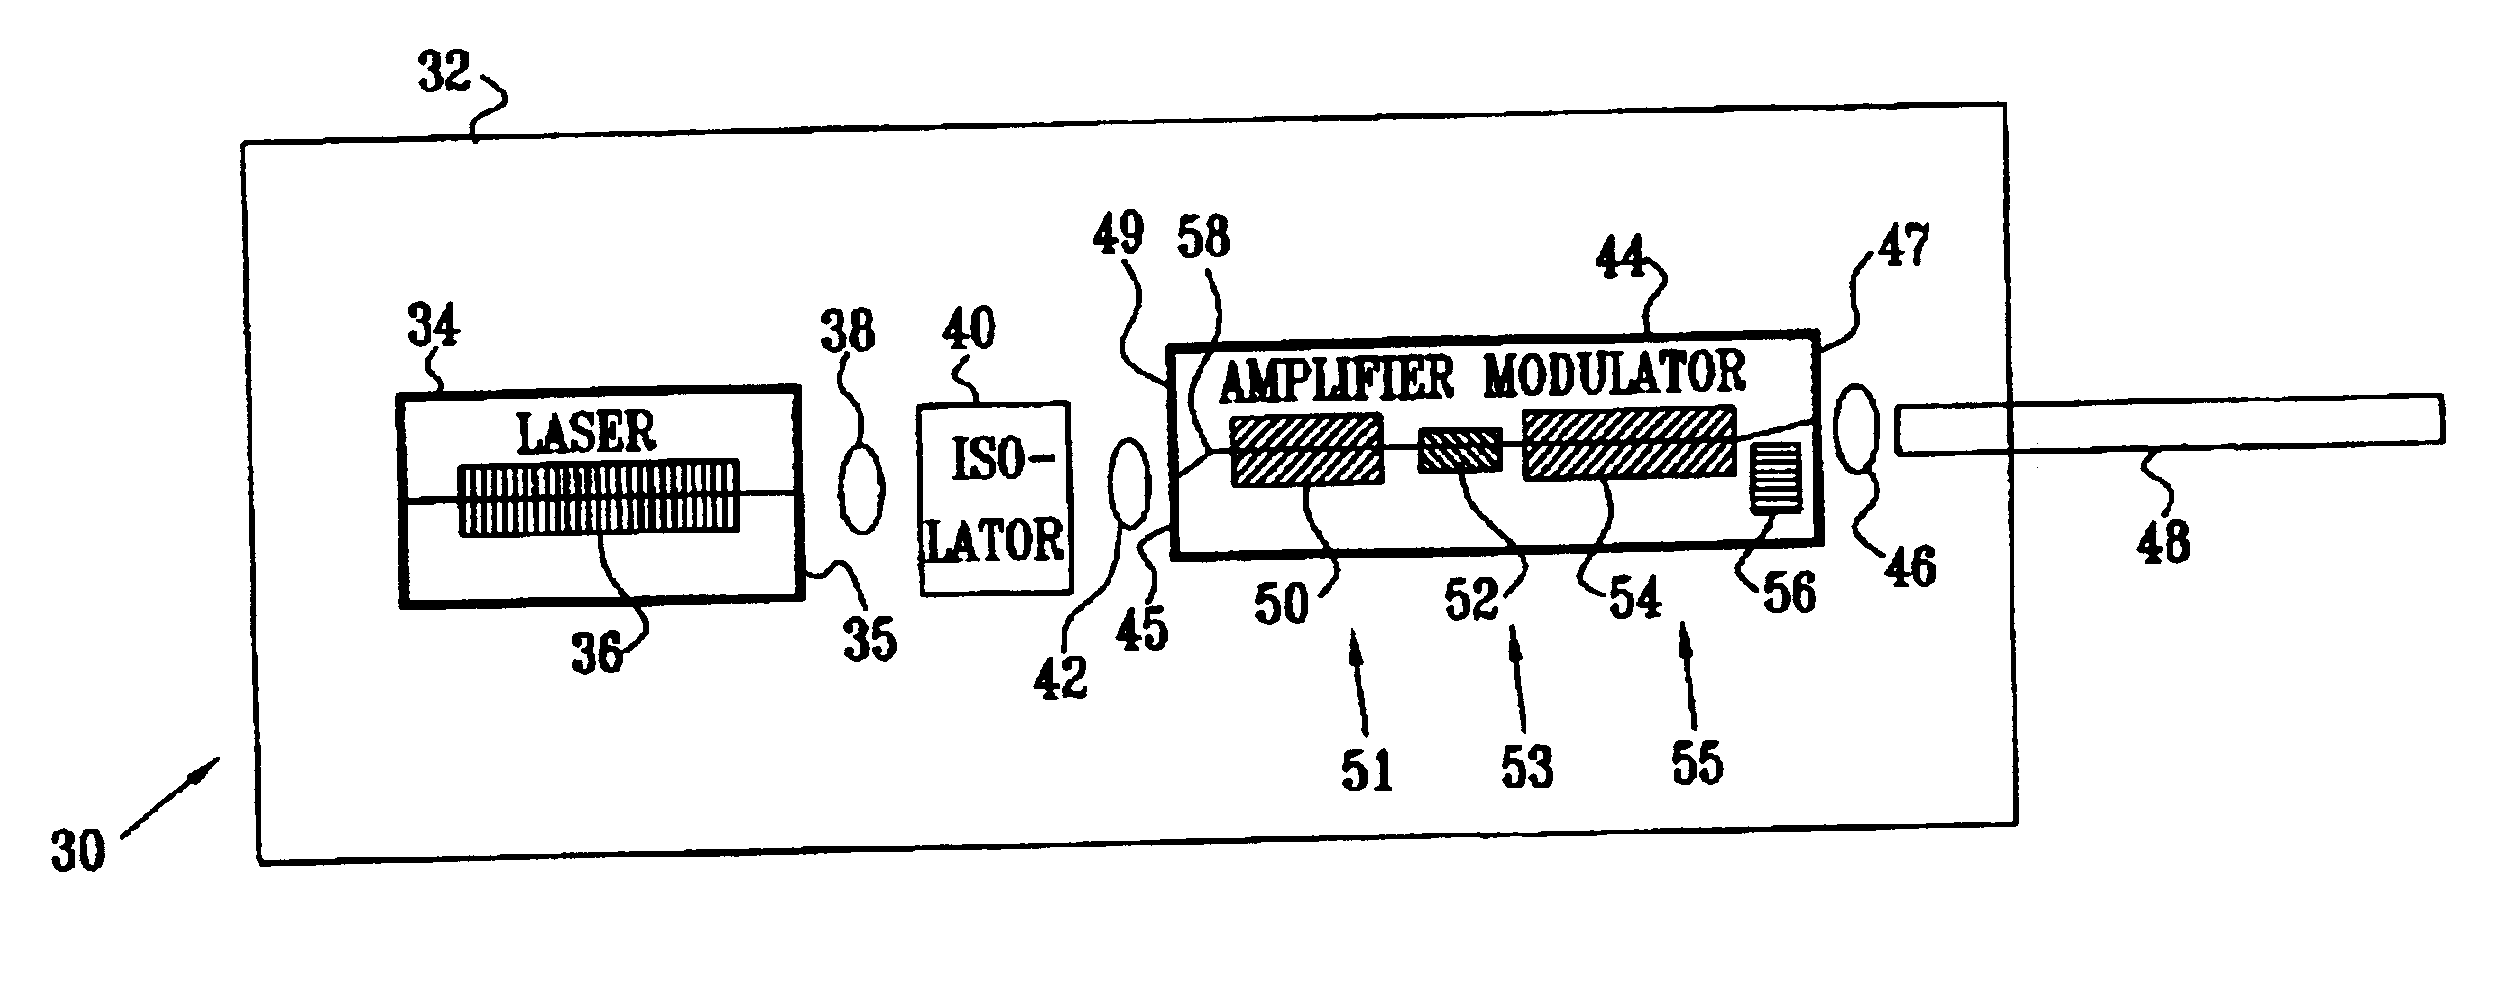 Hybrid optical transmitter with electroabsorption modulator and semiconductor optical amplifier